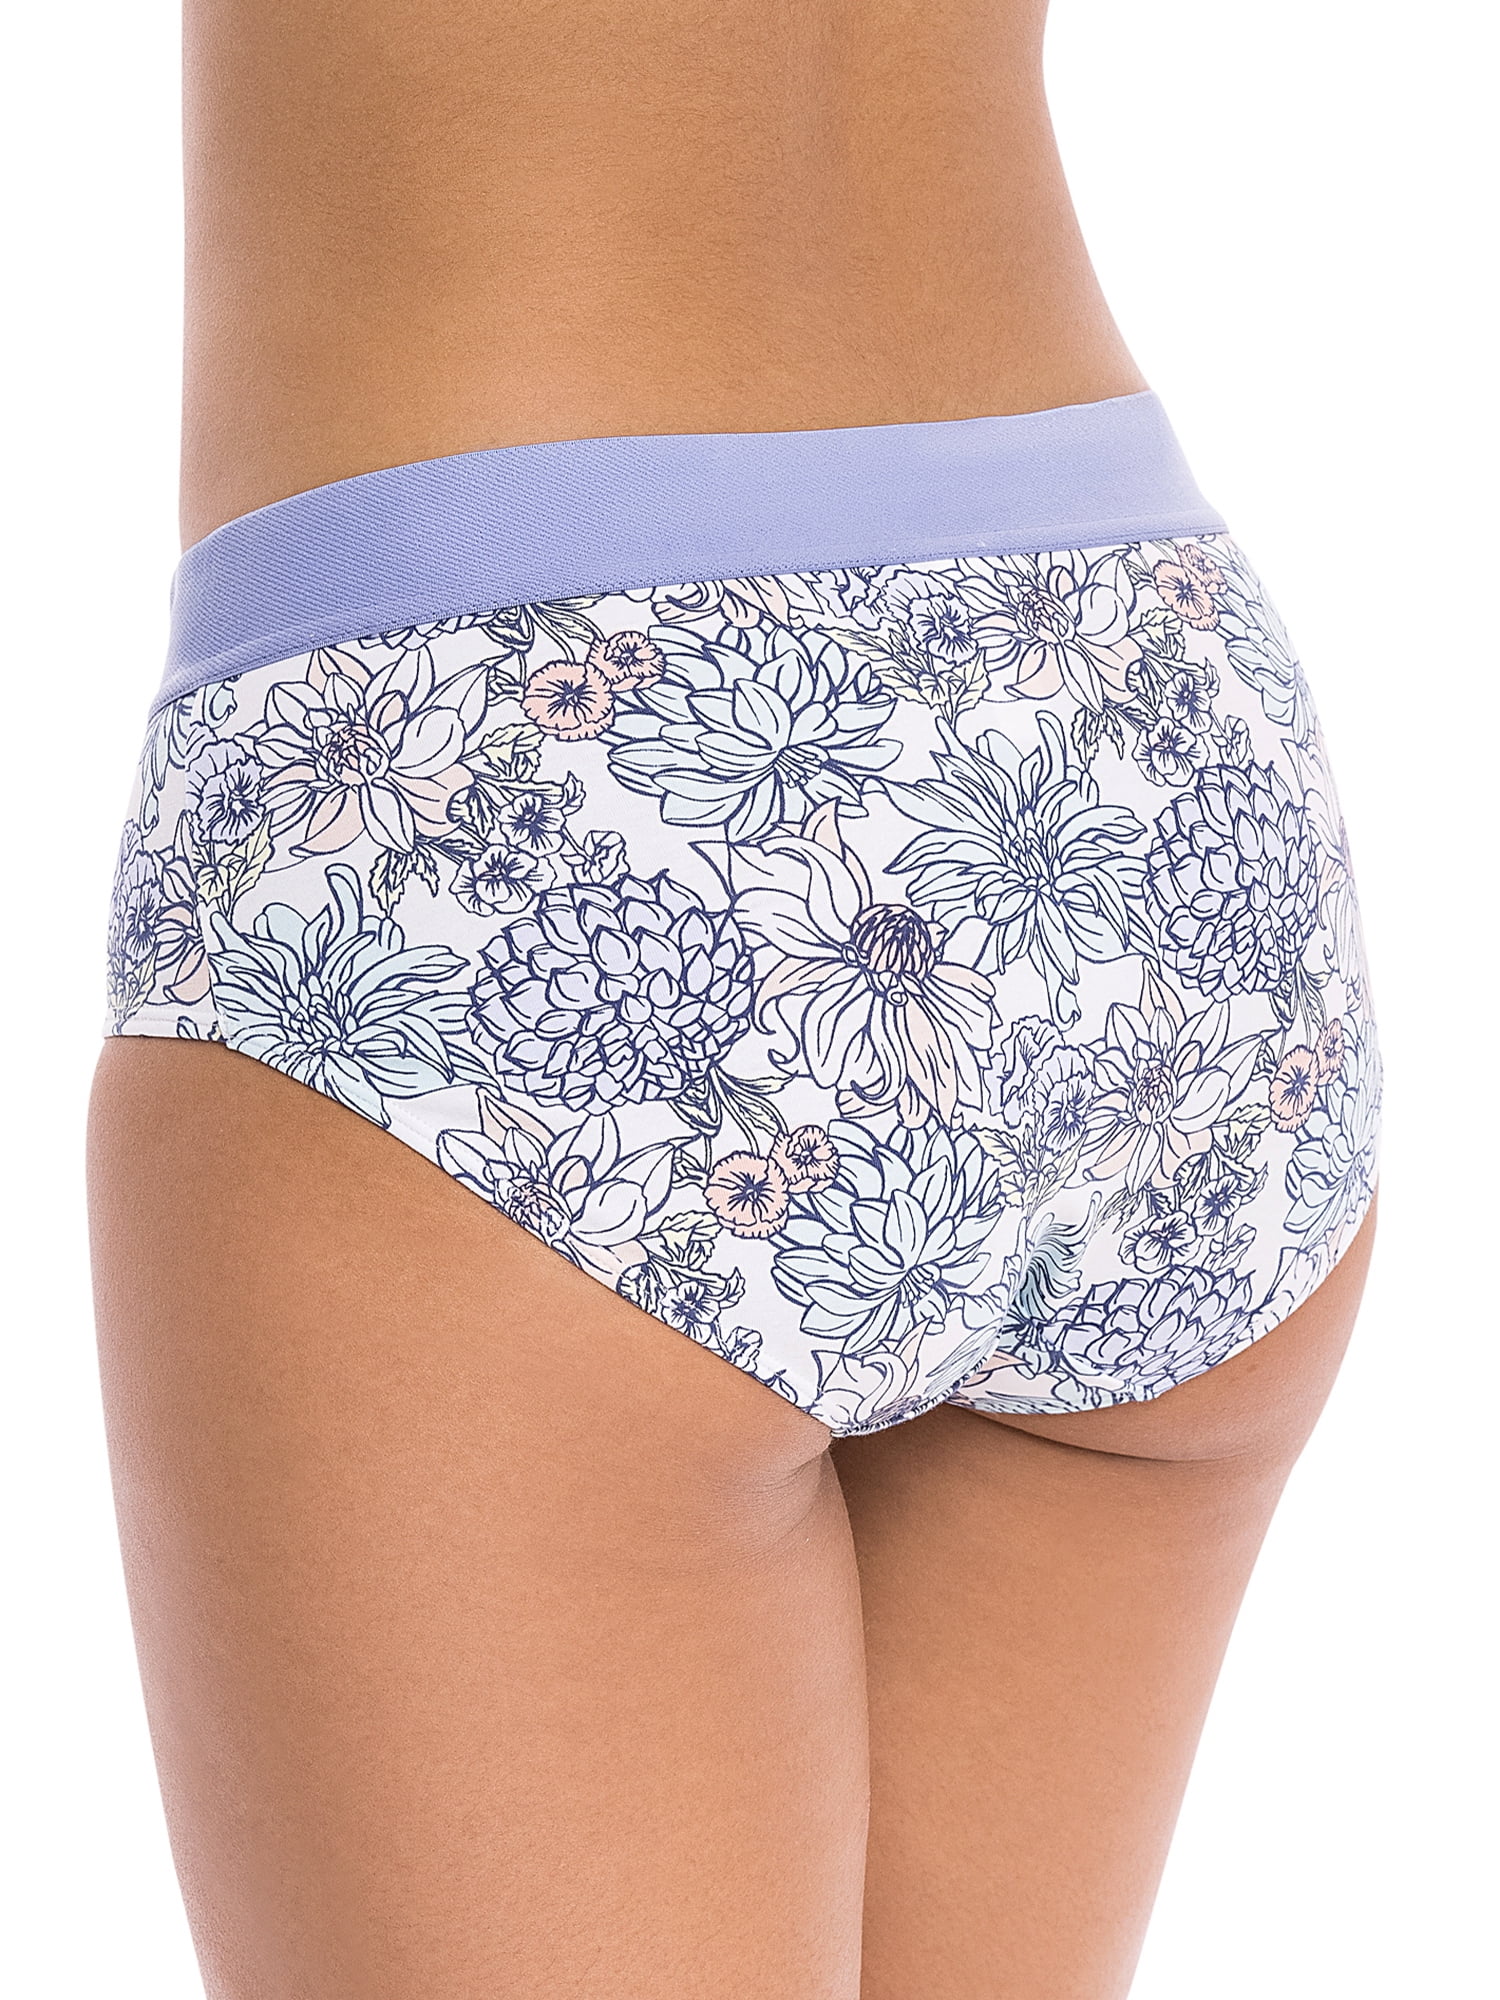 Kindly Yours Women's Cotton Hipster Panties, 3-Pack, Sizes XS to XXXL 